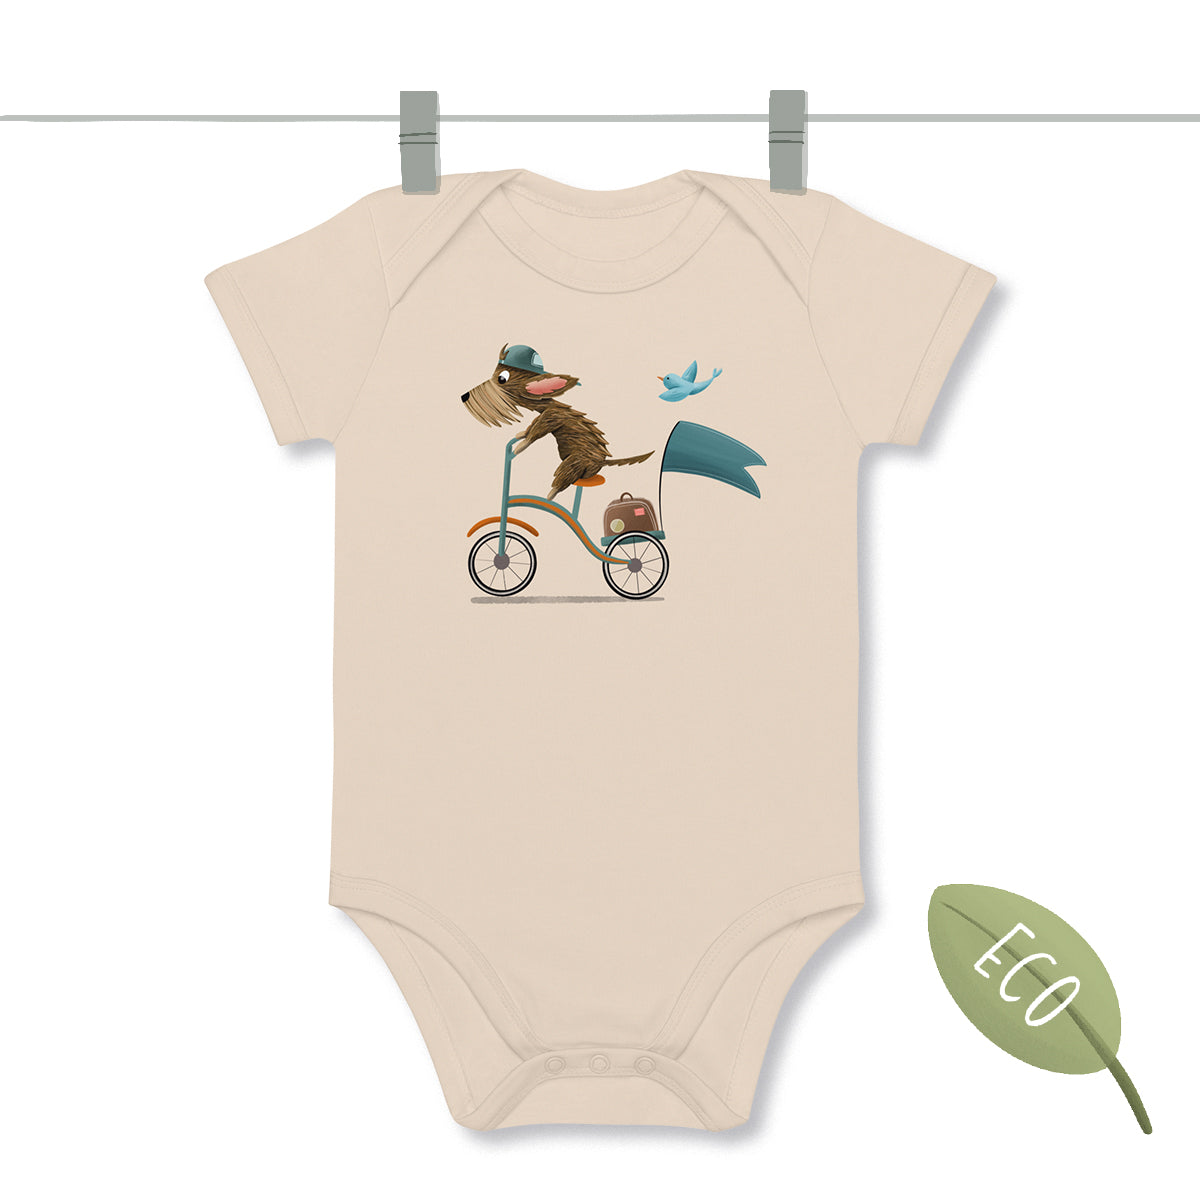 Natural Baby Bodysuit with a print of an illustration of a wire-haired Dachshund on a bike